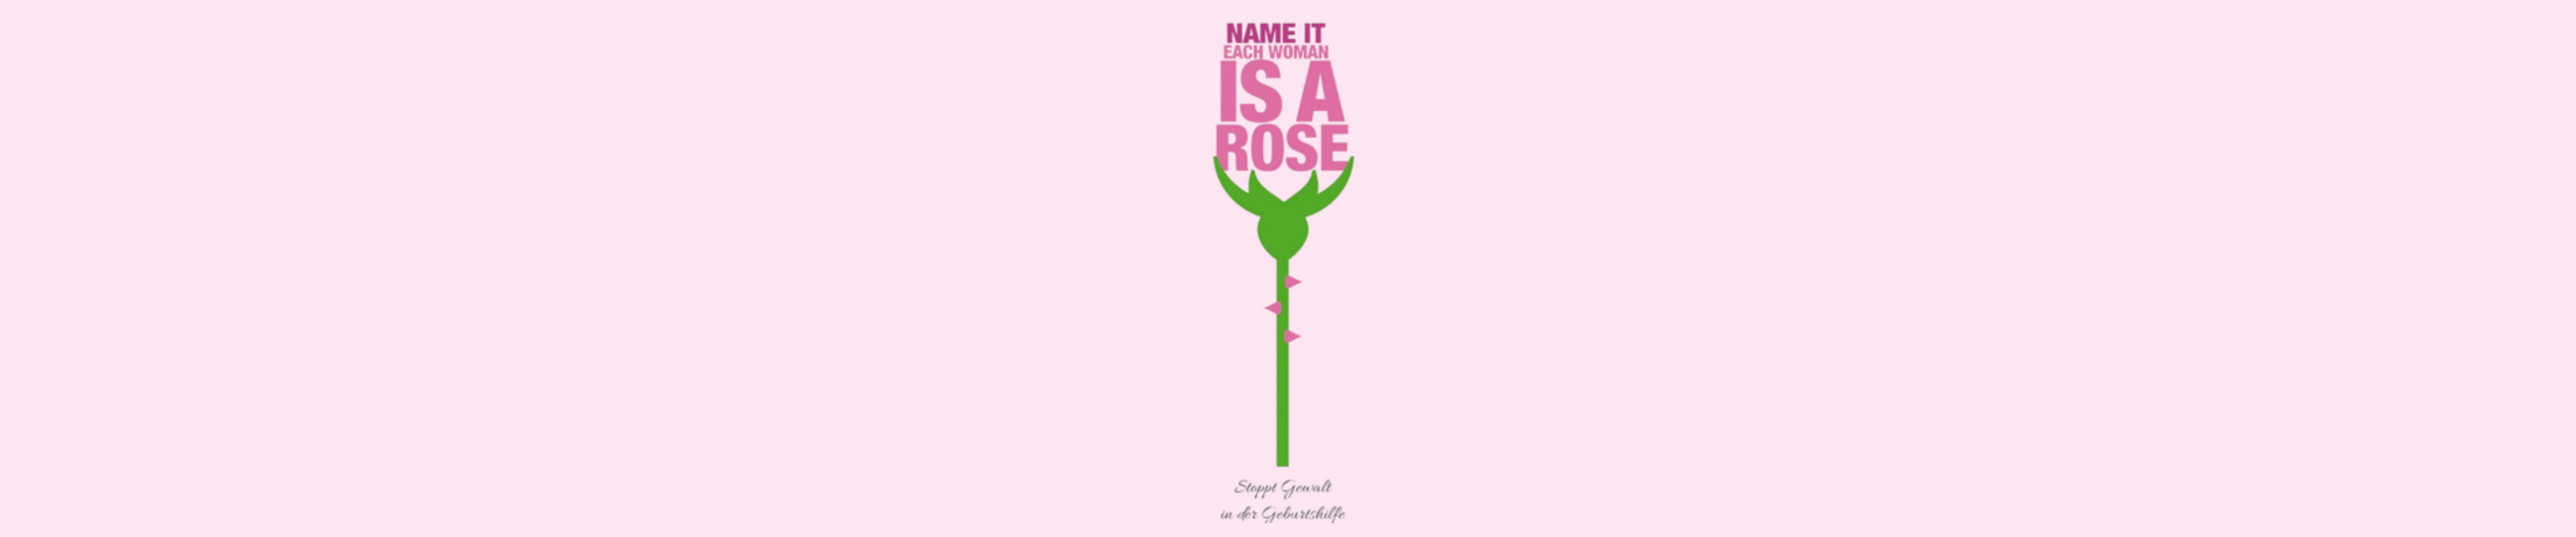 Name it - each woman is a rose. Grafische Rose